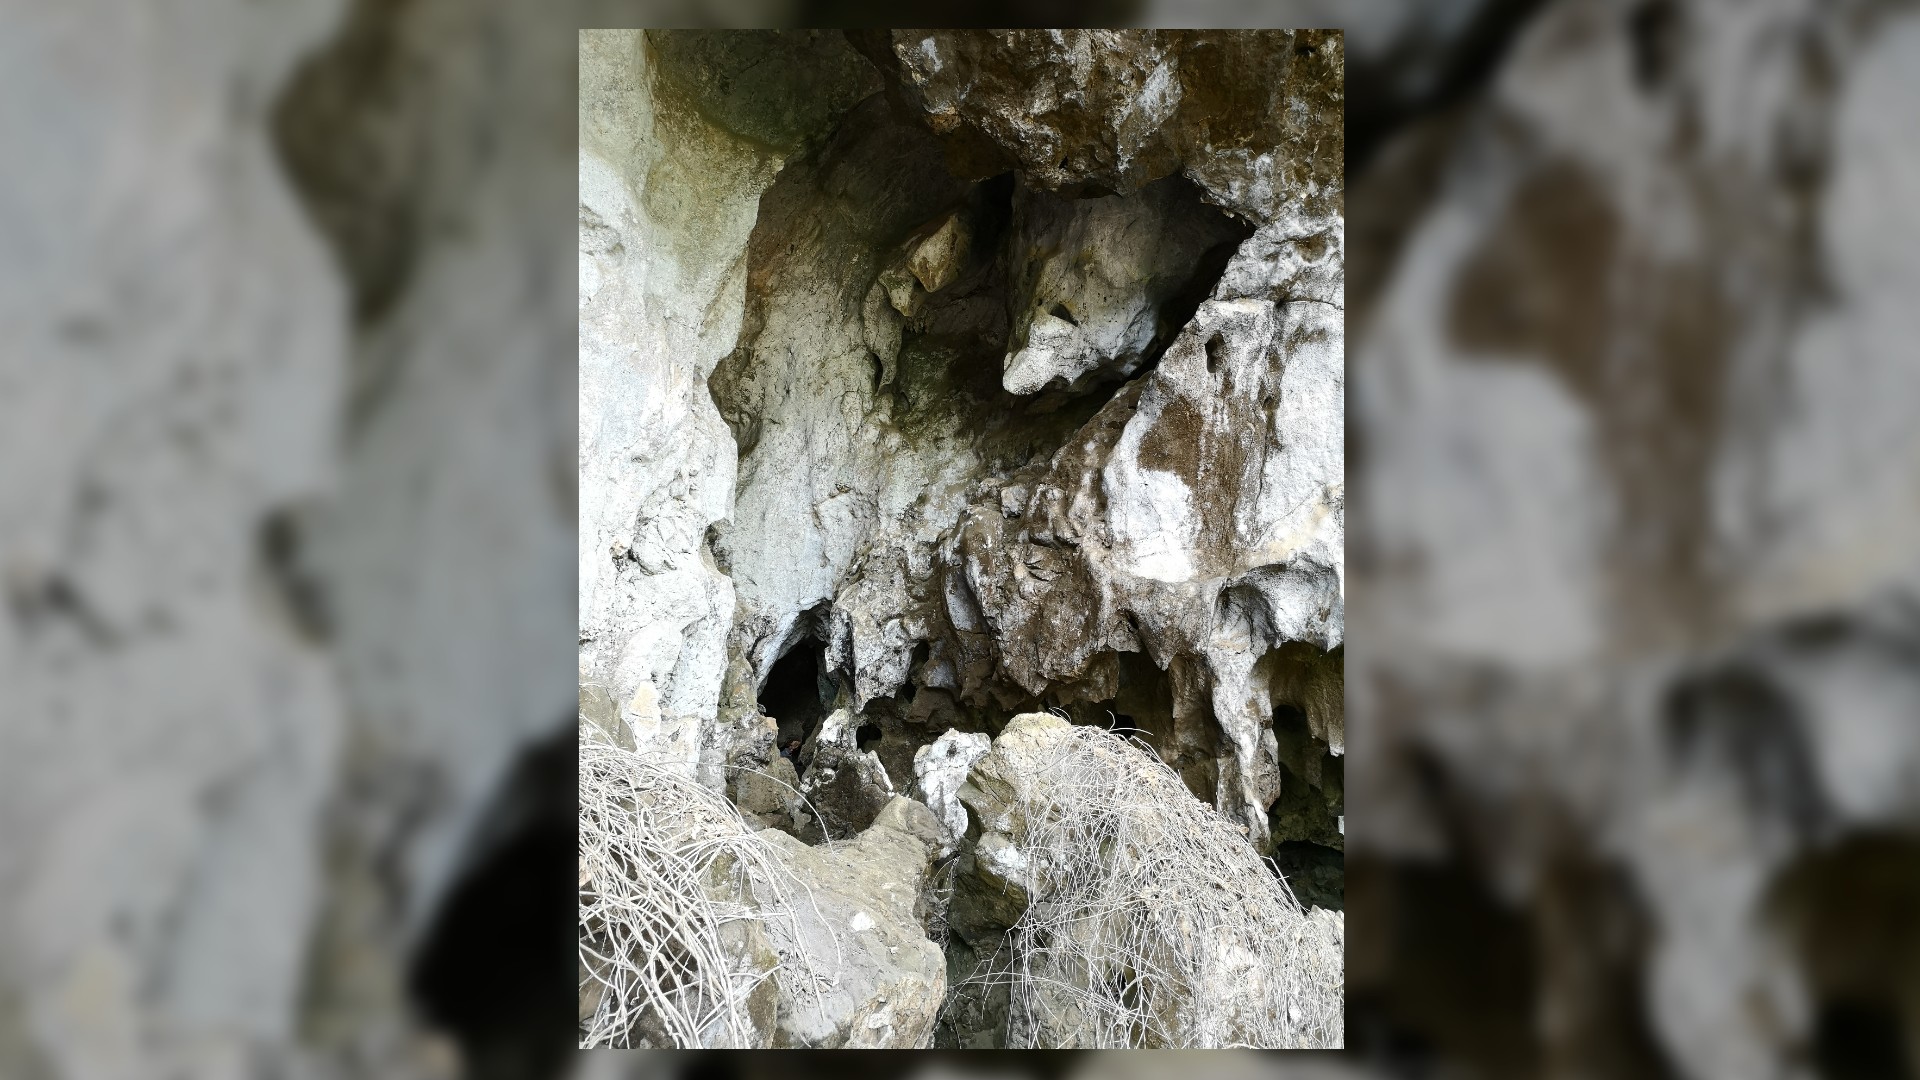 This is an image of the entrance to Cobra Cave in Laos. It is a rocky and rugged cave with plenty of hiding spots. In the foreground there is a smattering of long and thing strands of white vegetation.